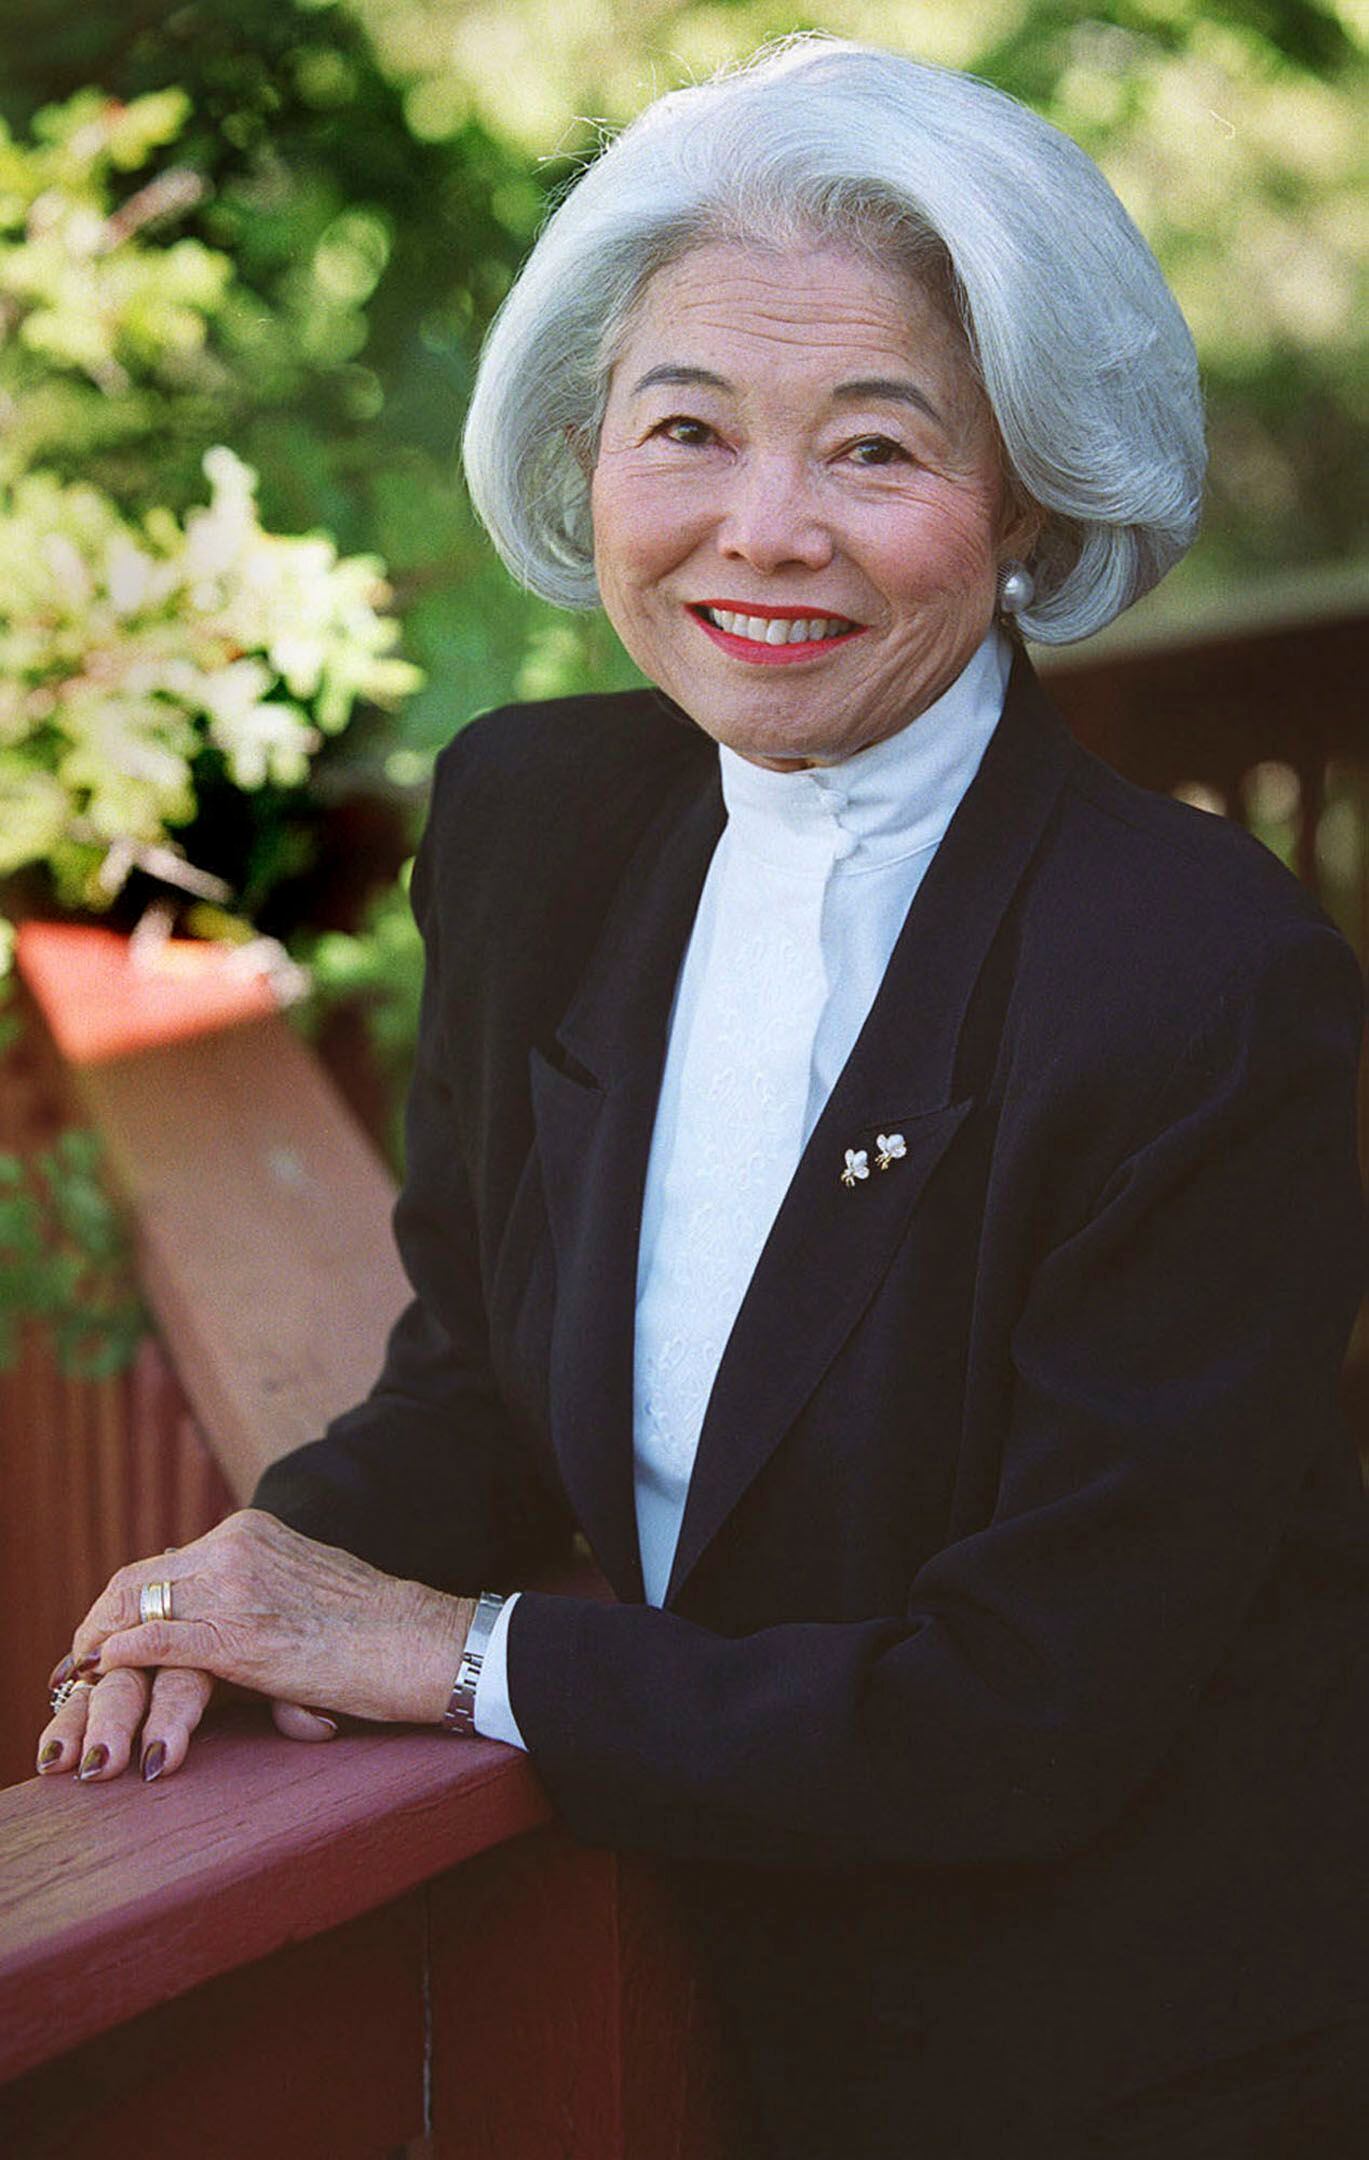 (The Salt Lake Tribune) Chieko Okazaki, a member of the General Relief Society Presidency of The Church of Jesus Christ of Latter-day Saints from 1990-1997, died in 2011.